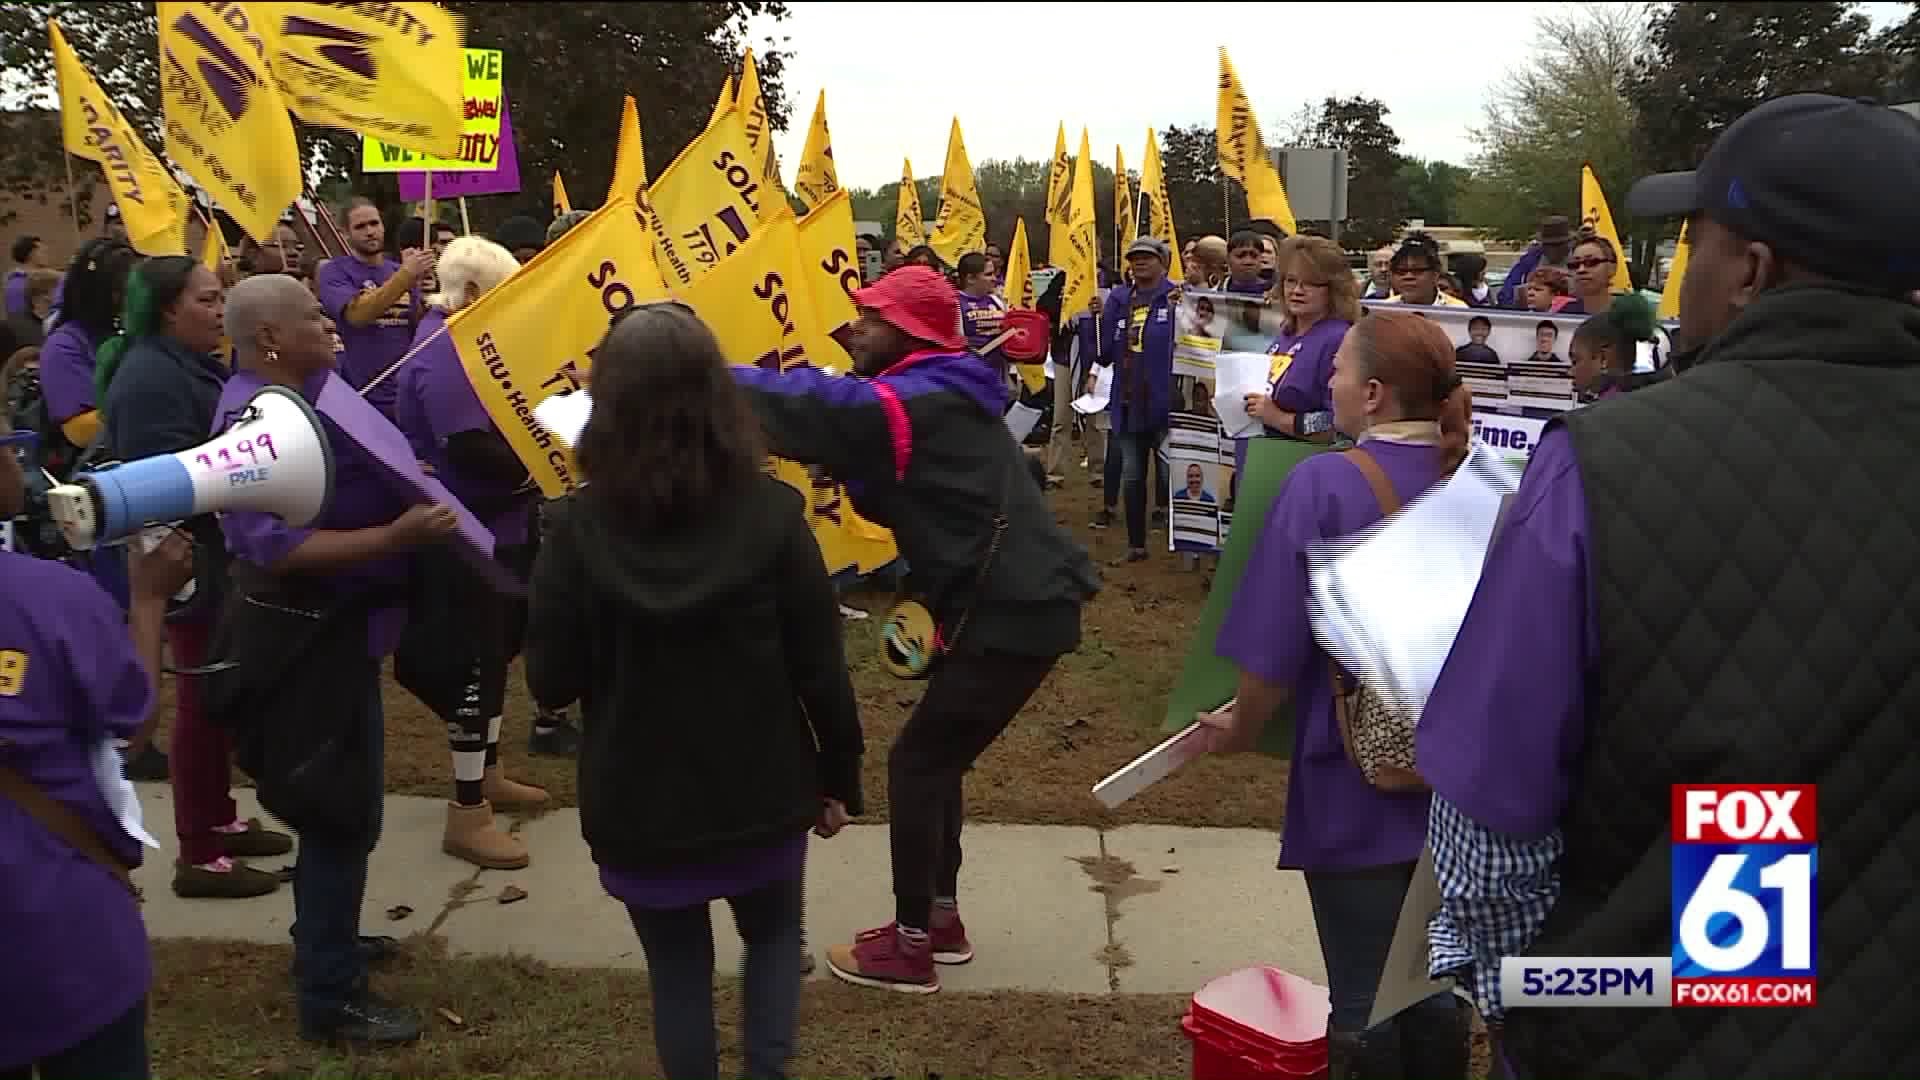 Home care workers action